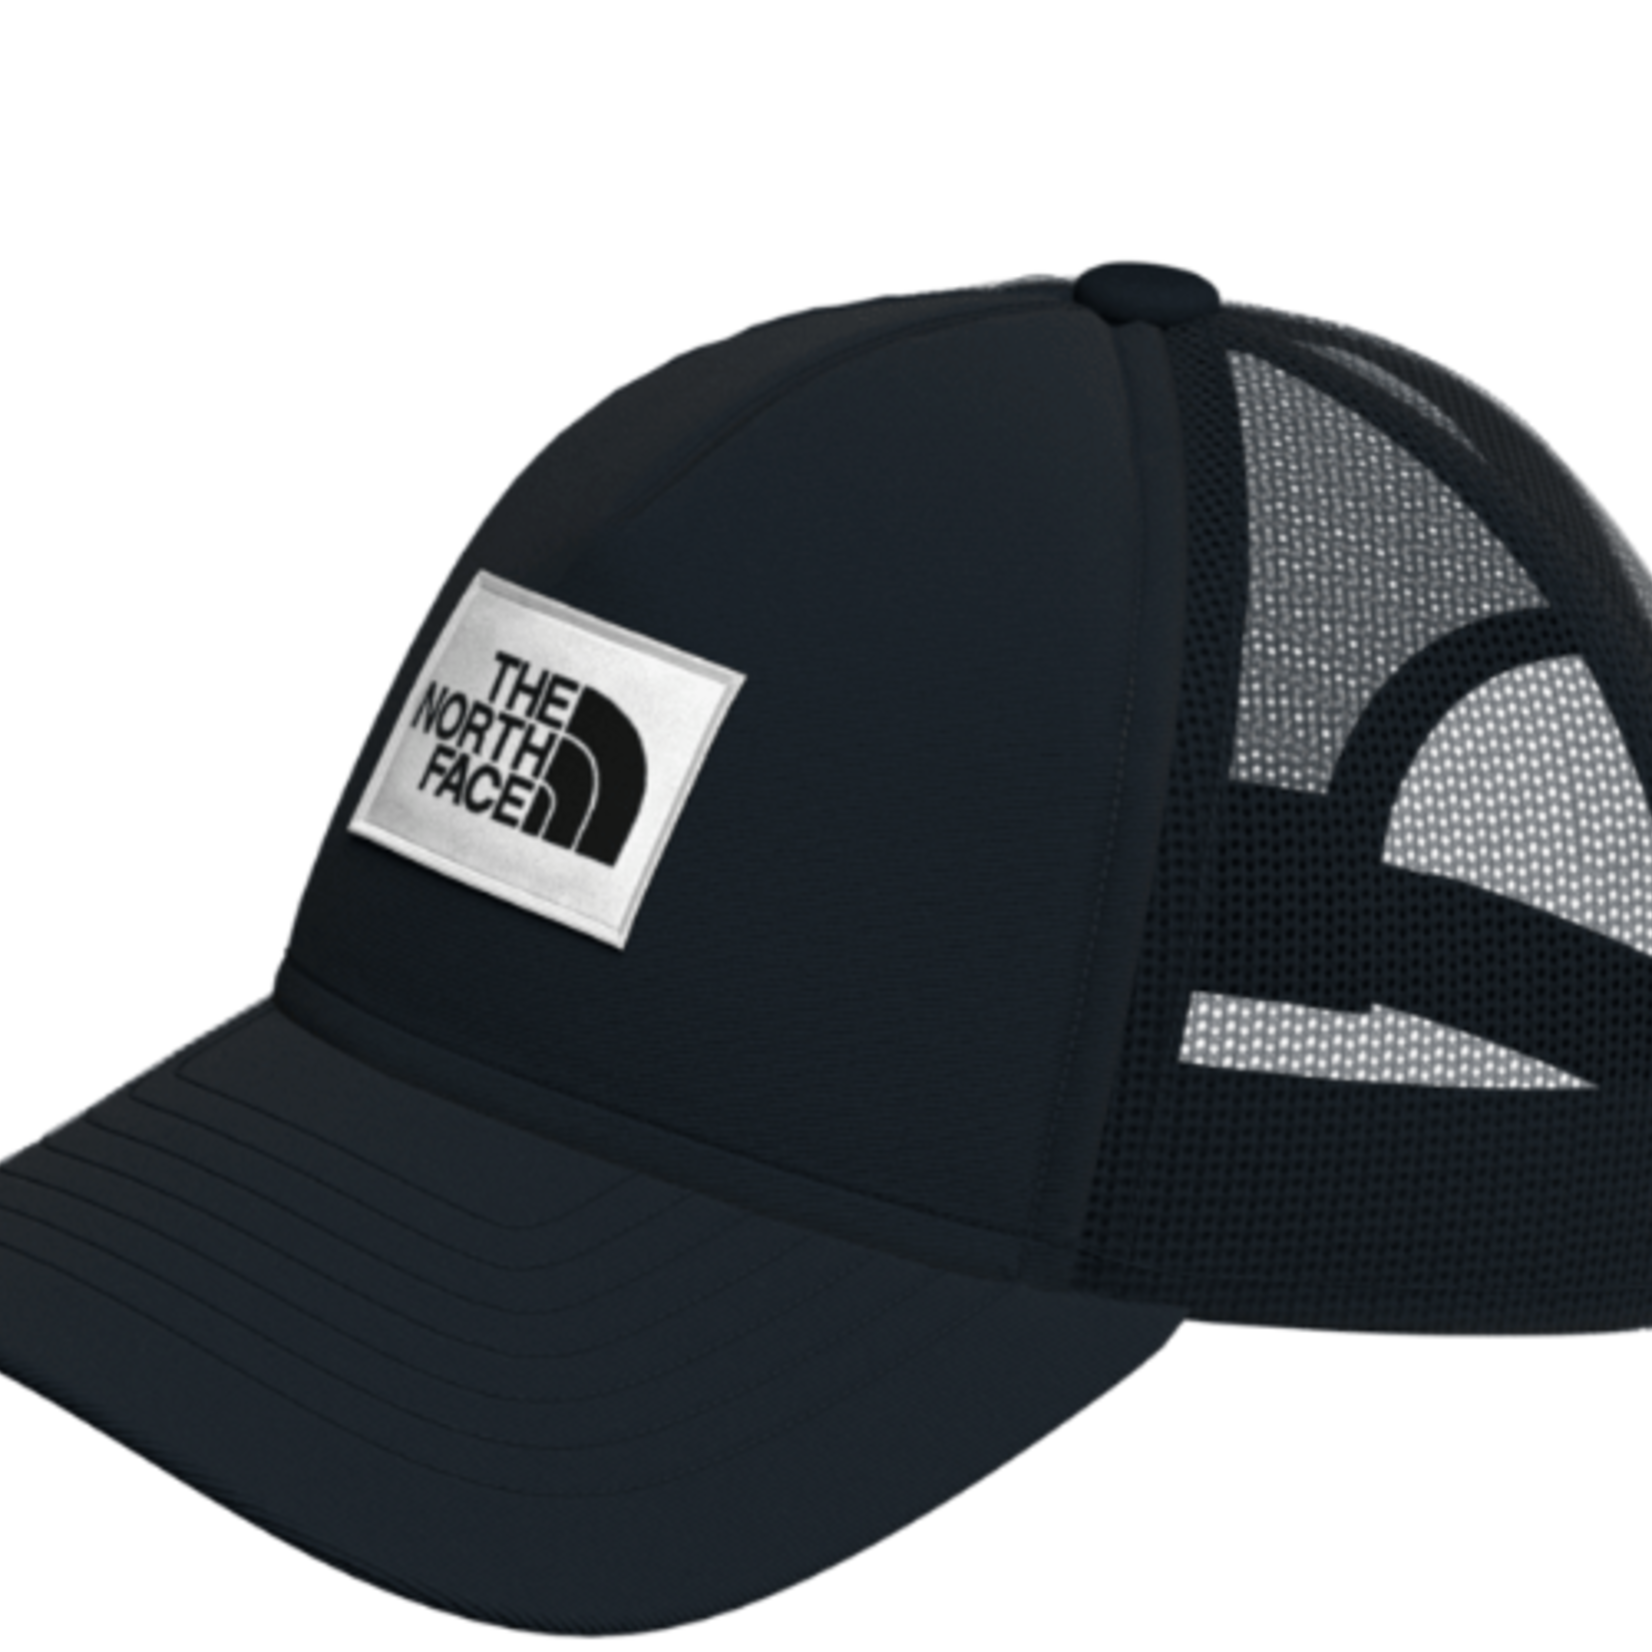 The North Face The North Face Hat, Keep It Patched Structured Trucker, Mens, OS